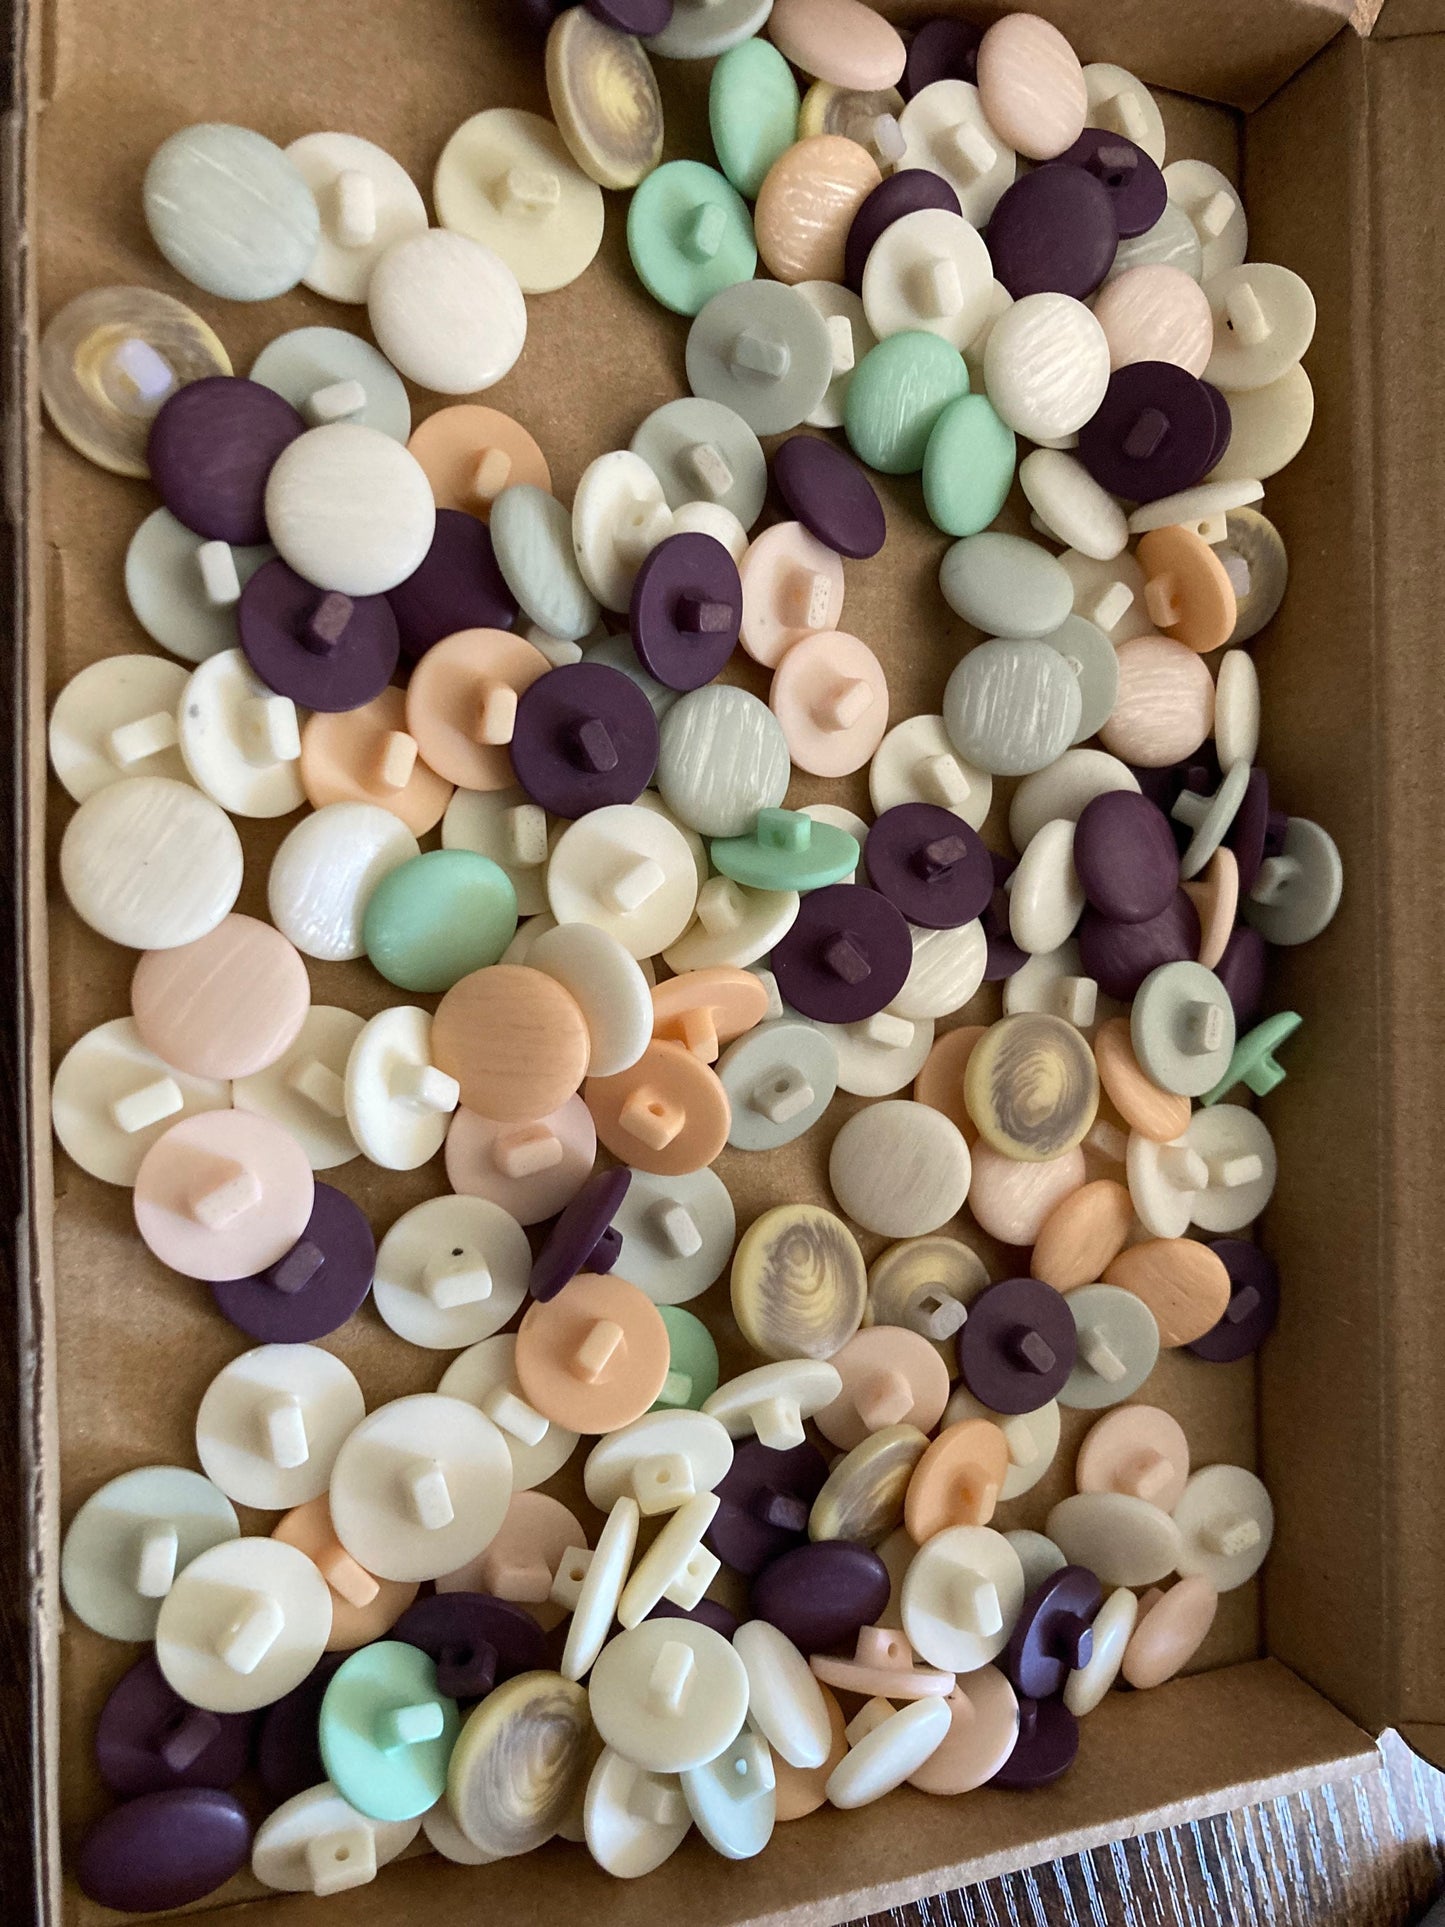 Job lot 18mm plastic buttons in cream violet and purple mint green pink 181 gms